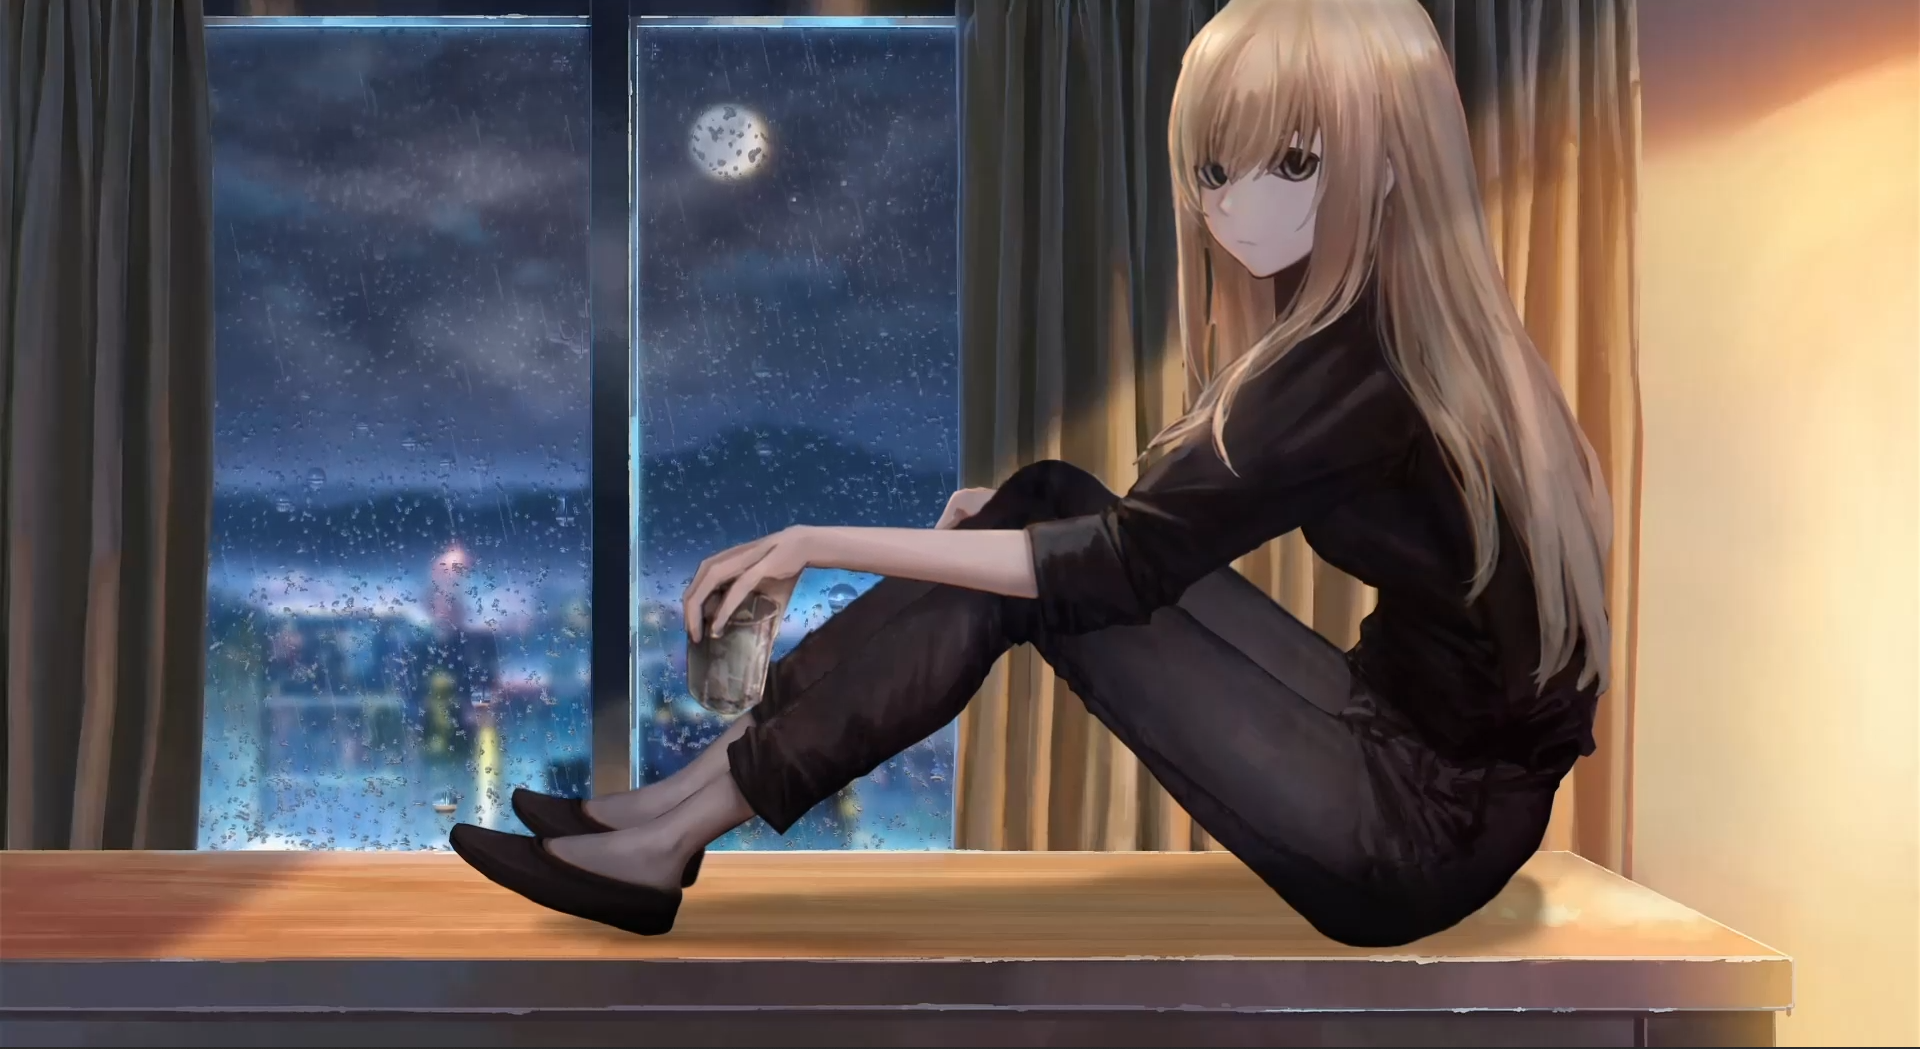 A girl sitting on the window sill drinks an evening drink live wallpaper [DOWNLOAD FREE]